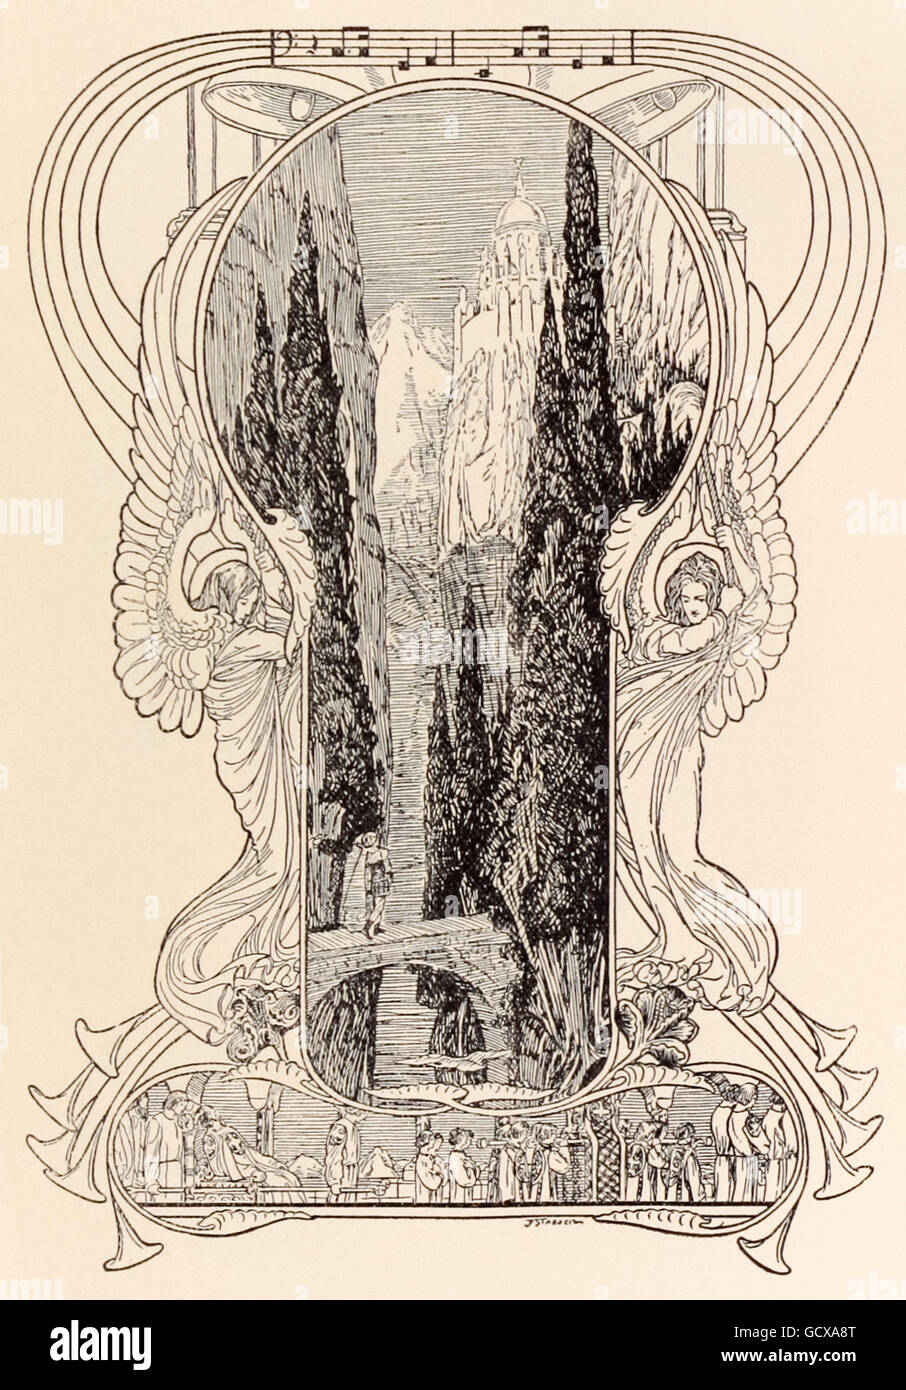 “Monsalvat, the Castle of the Grail.” Franz Stassen (1869-1949) illustration for “Parsifal” by Richard Wagner (1813-1883). Klingsor's magic palace in the south of Spain, the musical notation at the top is from Act 1 with angels on both sides ringing bells. See description for more information. Stock Photo